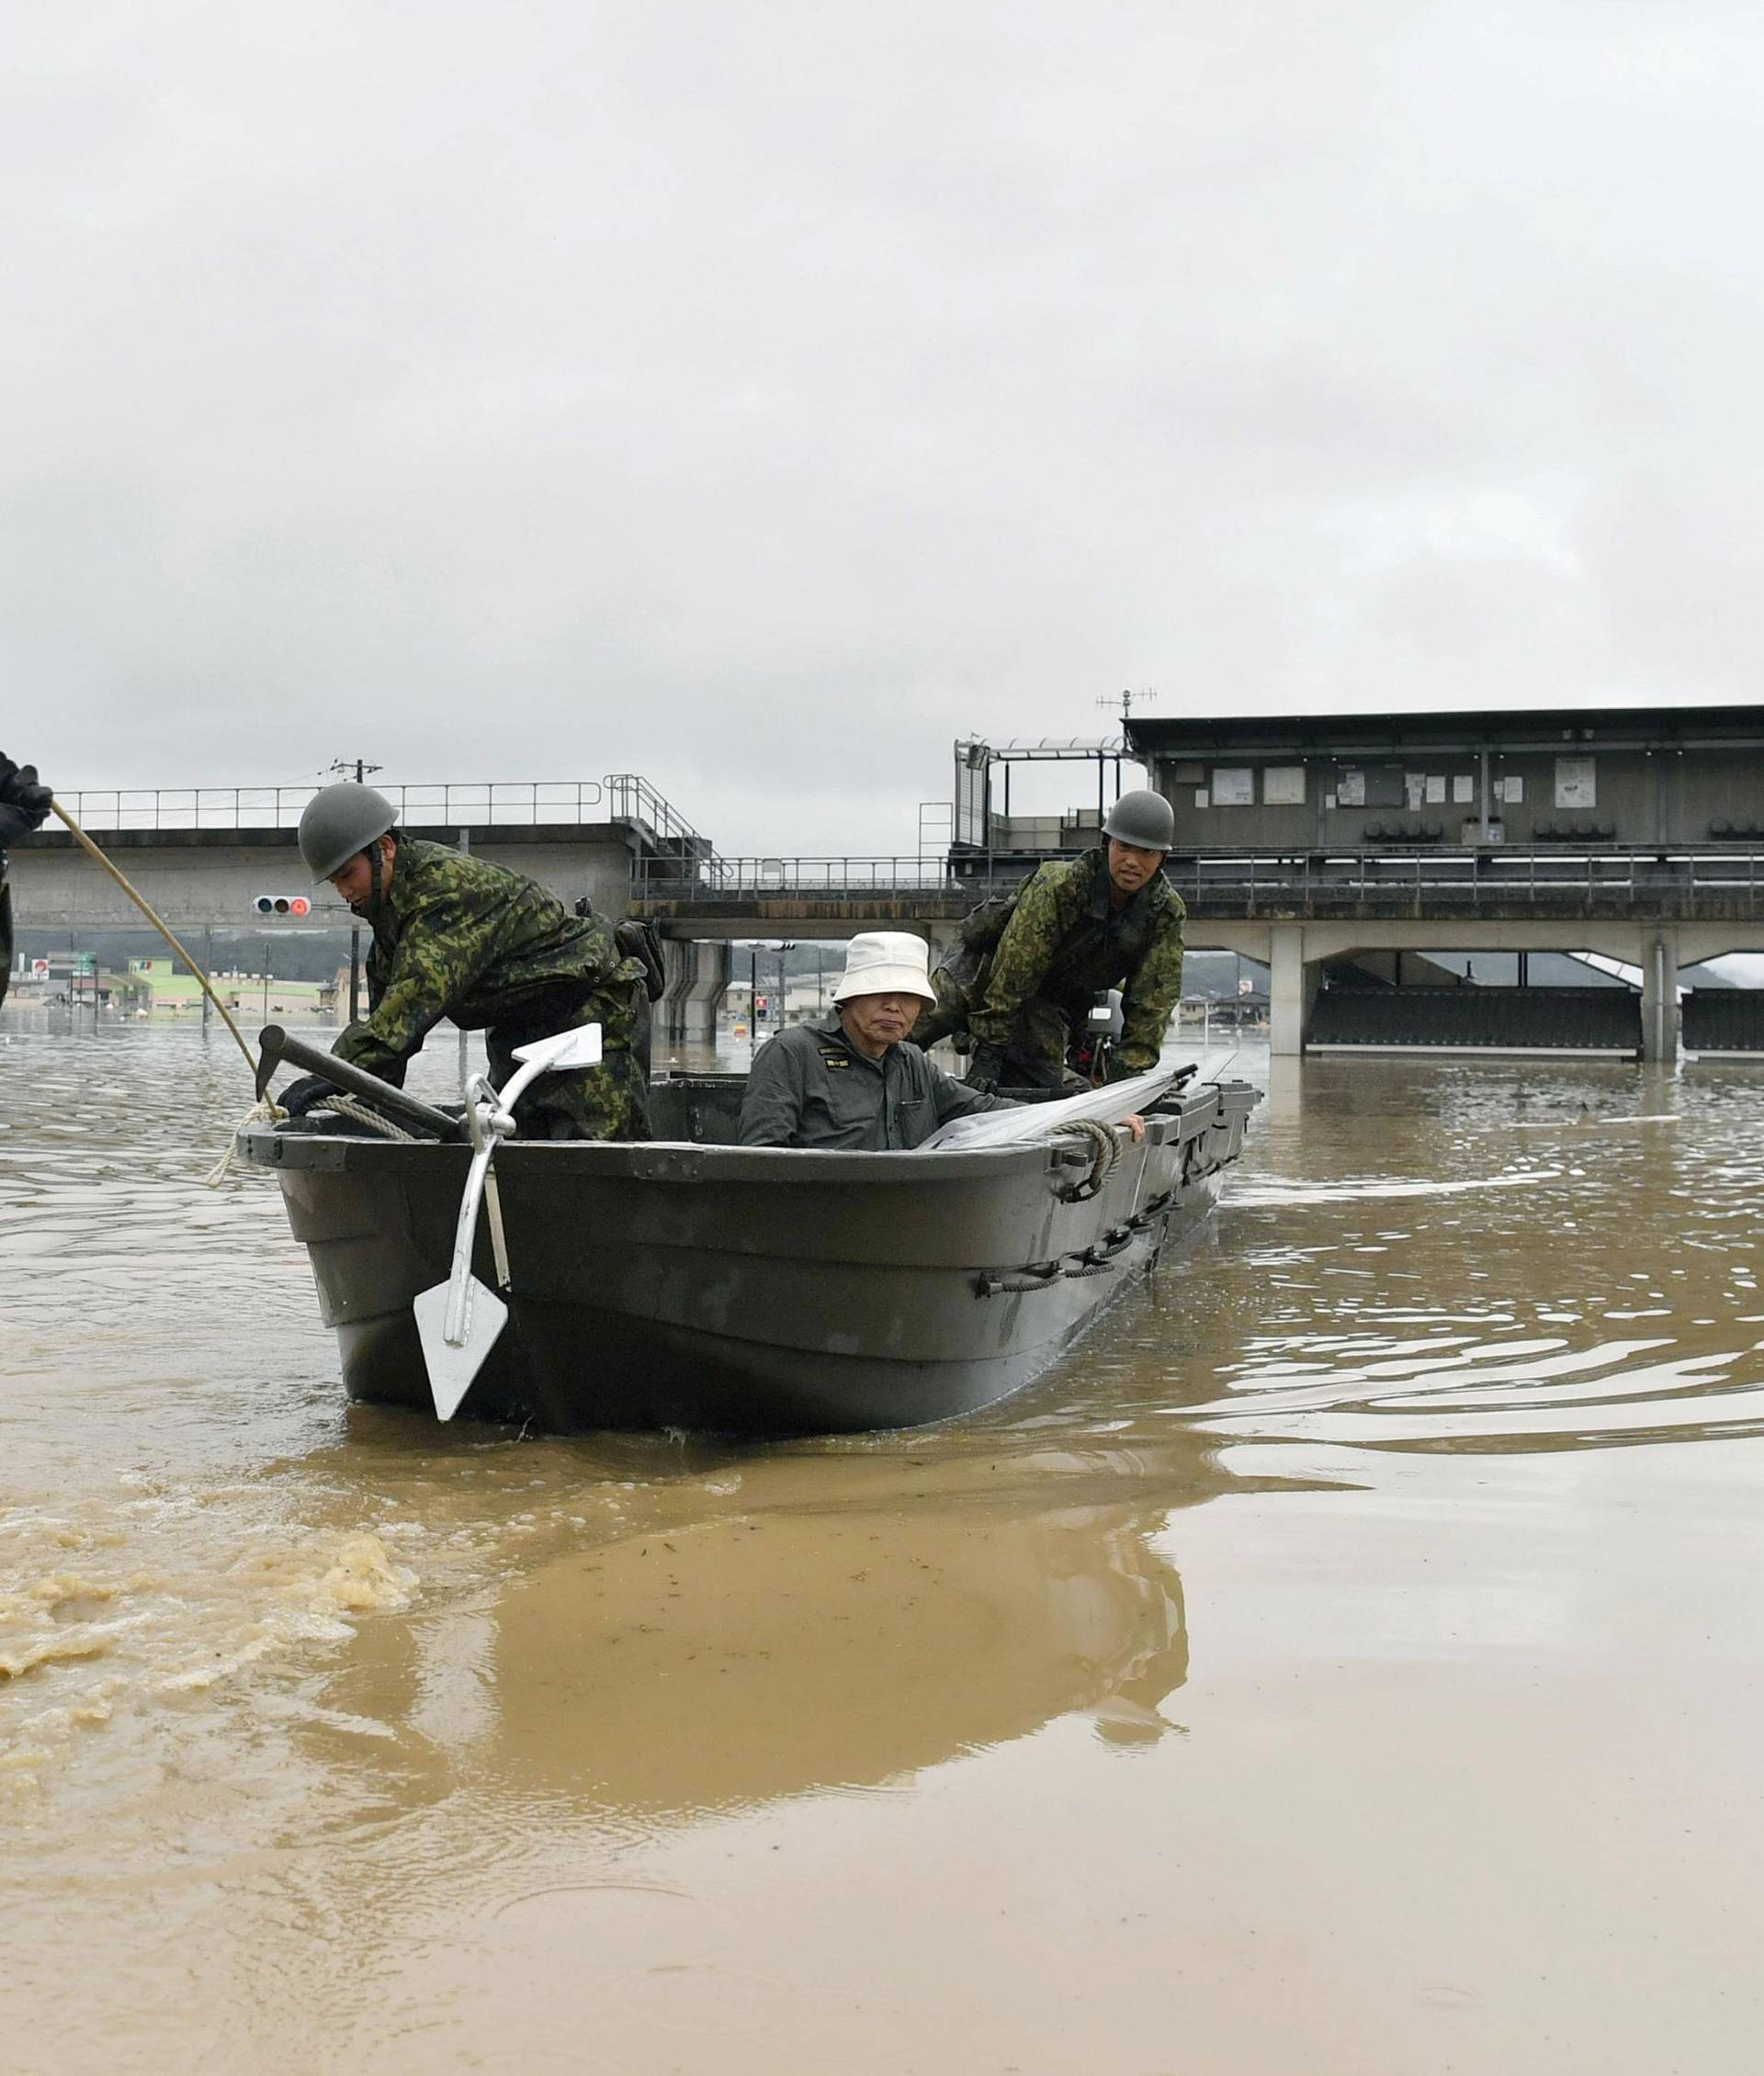 A local resident is rescued from a flooded area in Kurashiki